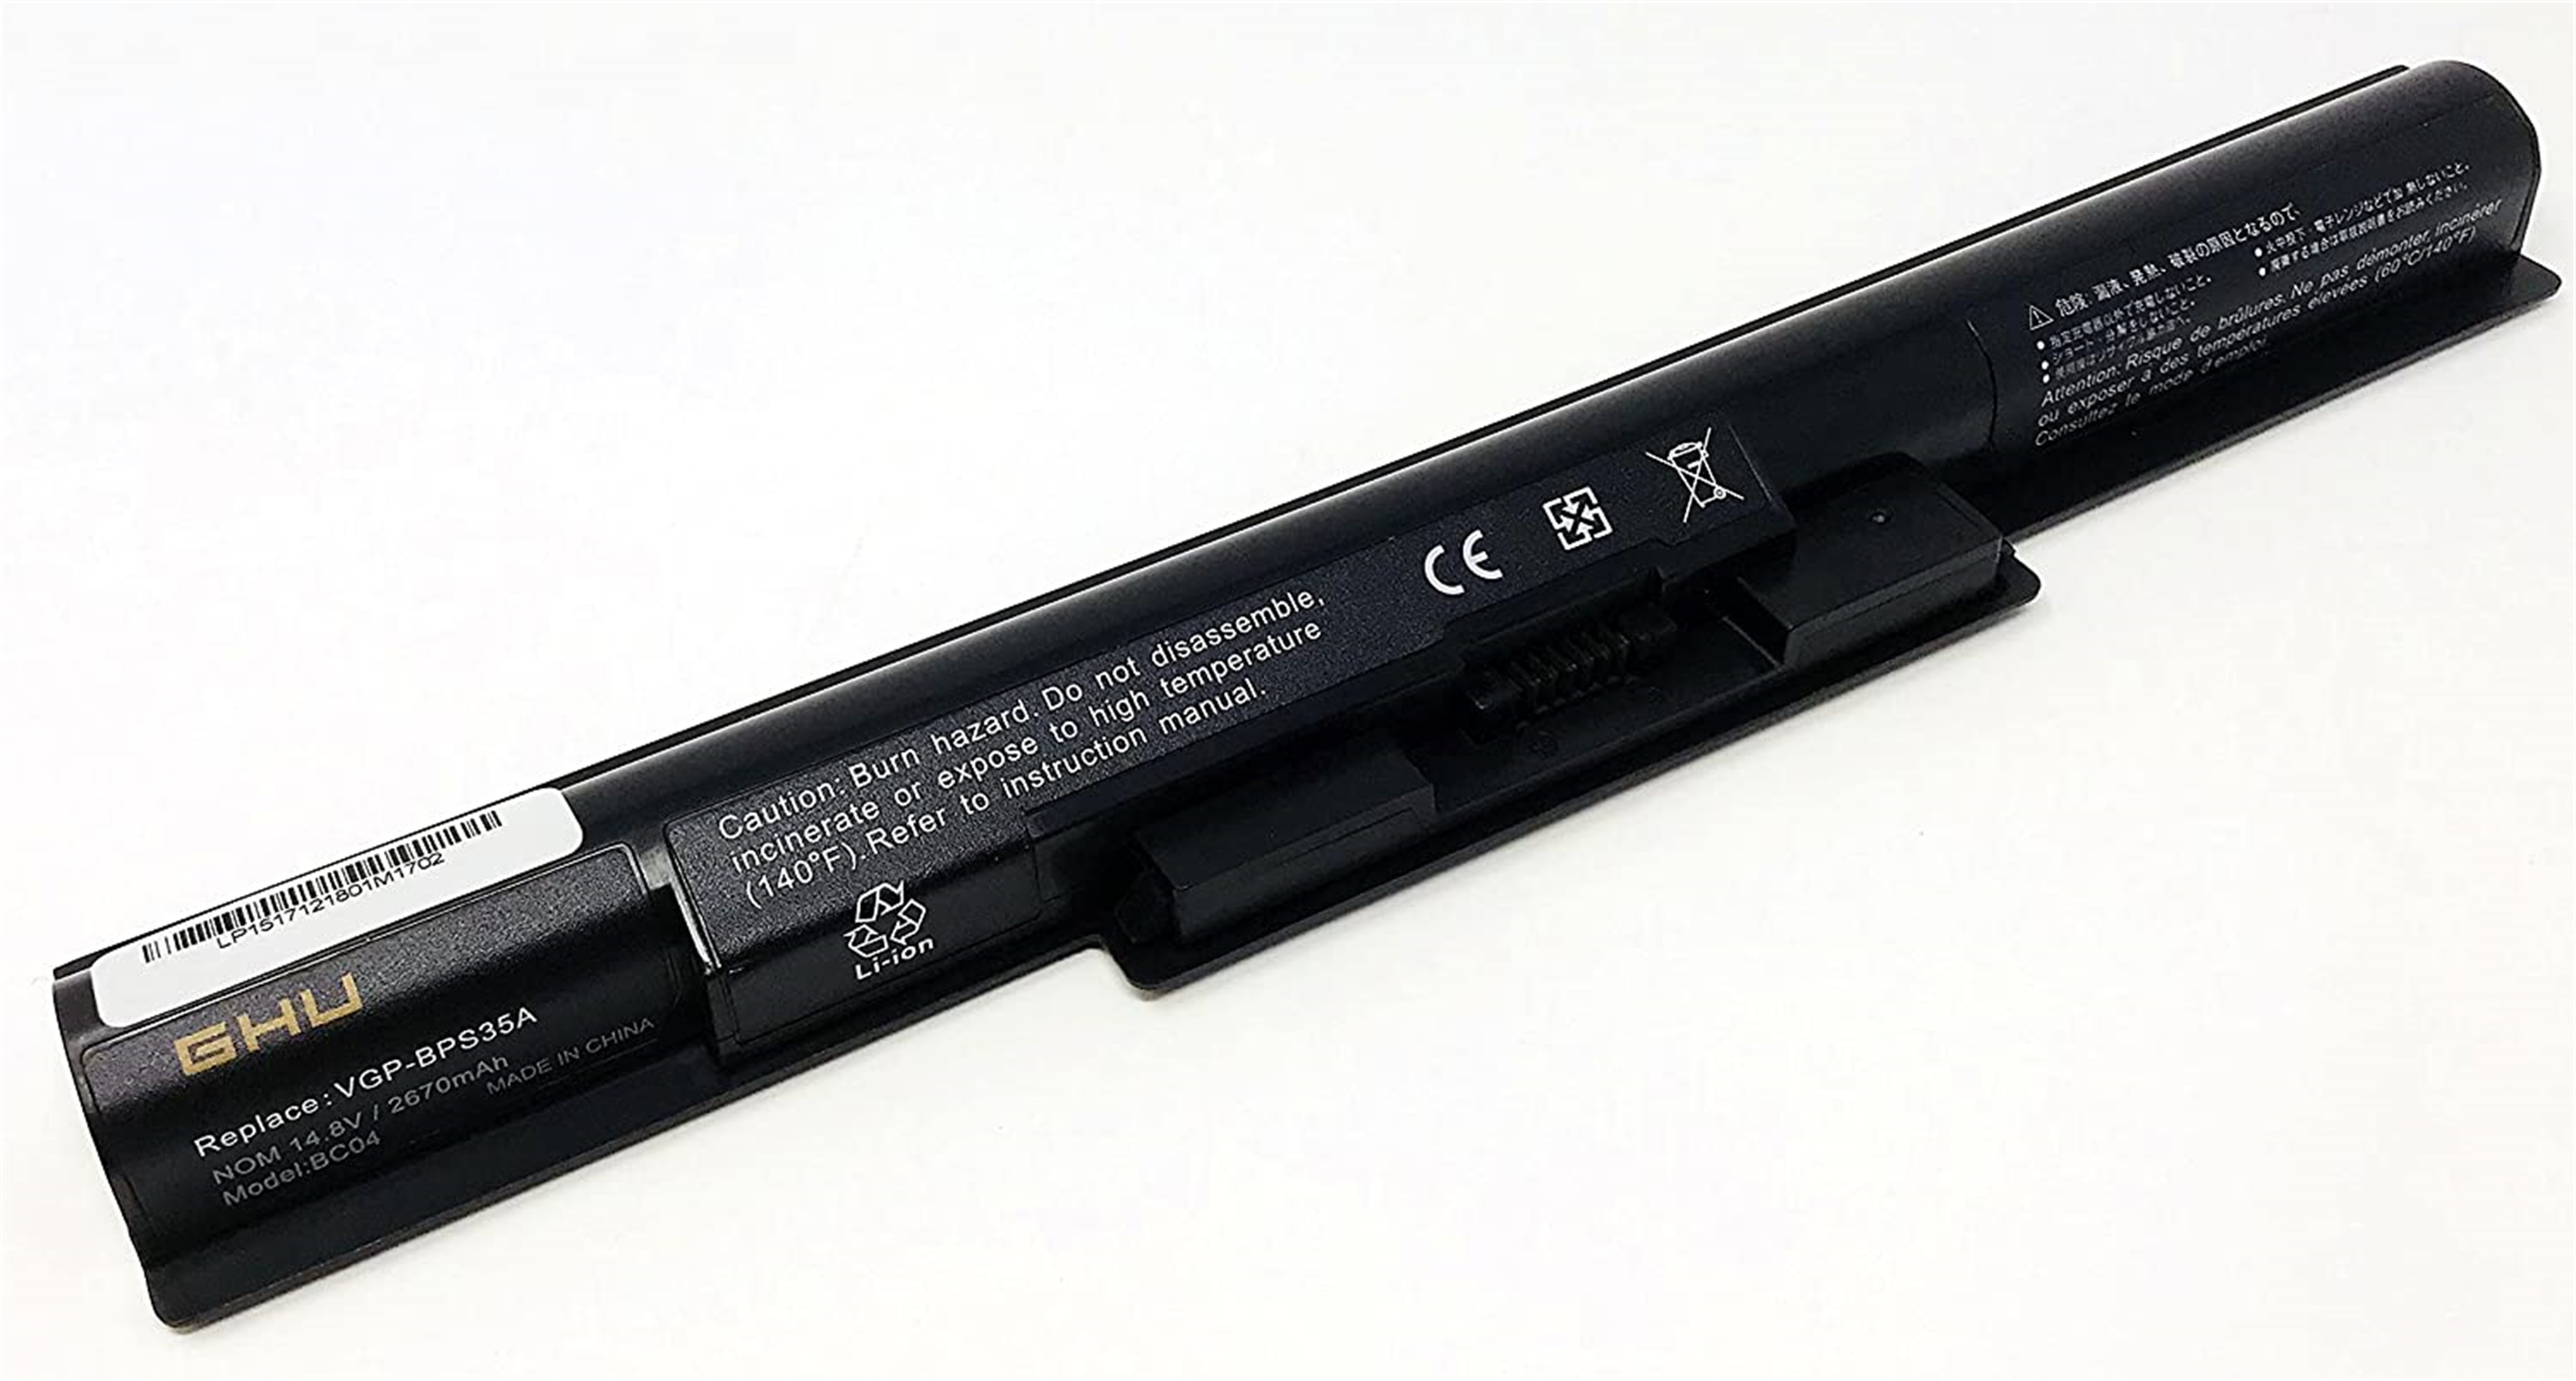 VGP-BPS35A rechargeable lithium ion Notebook battery Laptop battery Portege SONY VAIO 14E series Sony Vaio 15E series 14.8V 2670MAH/40WH 